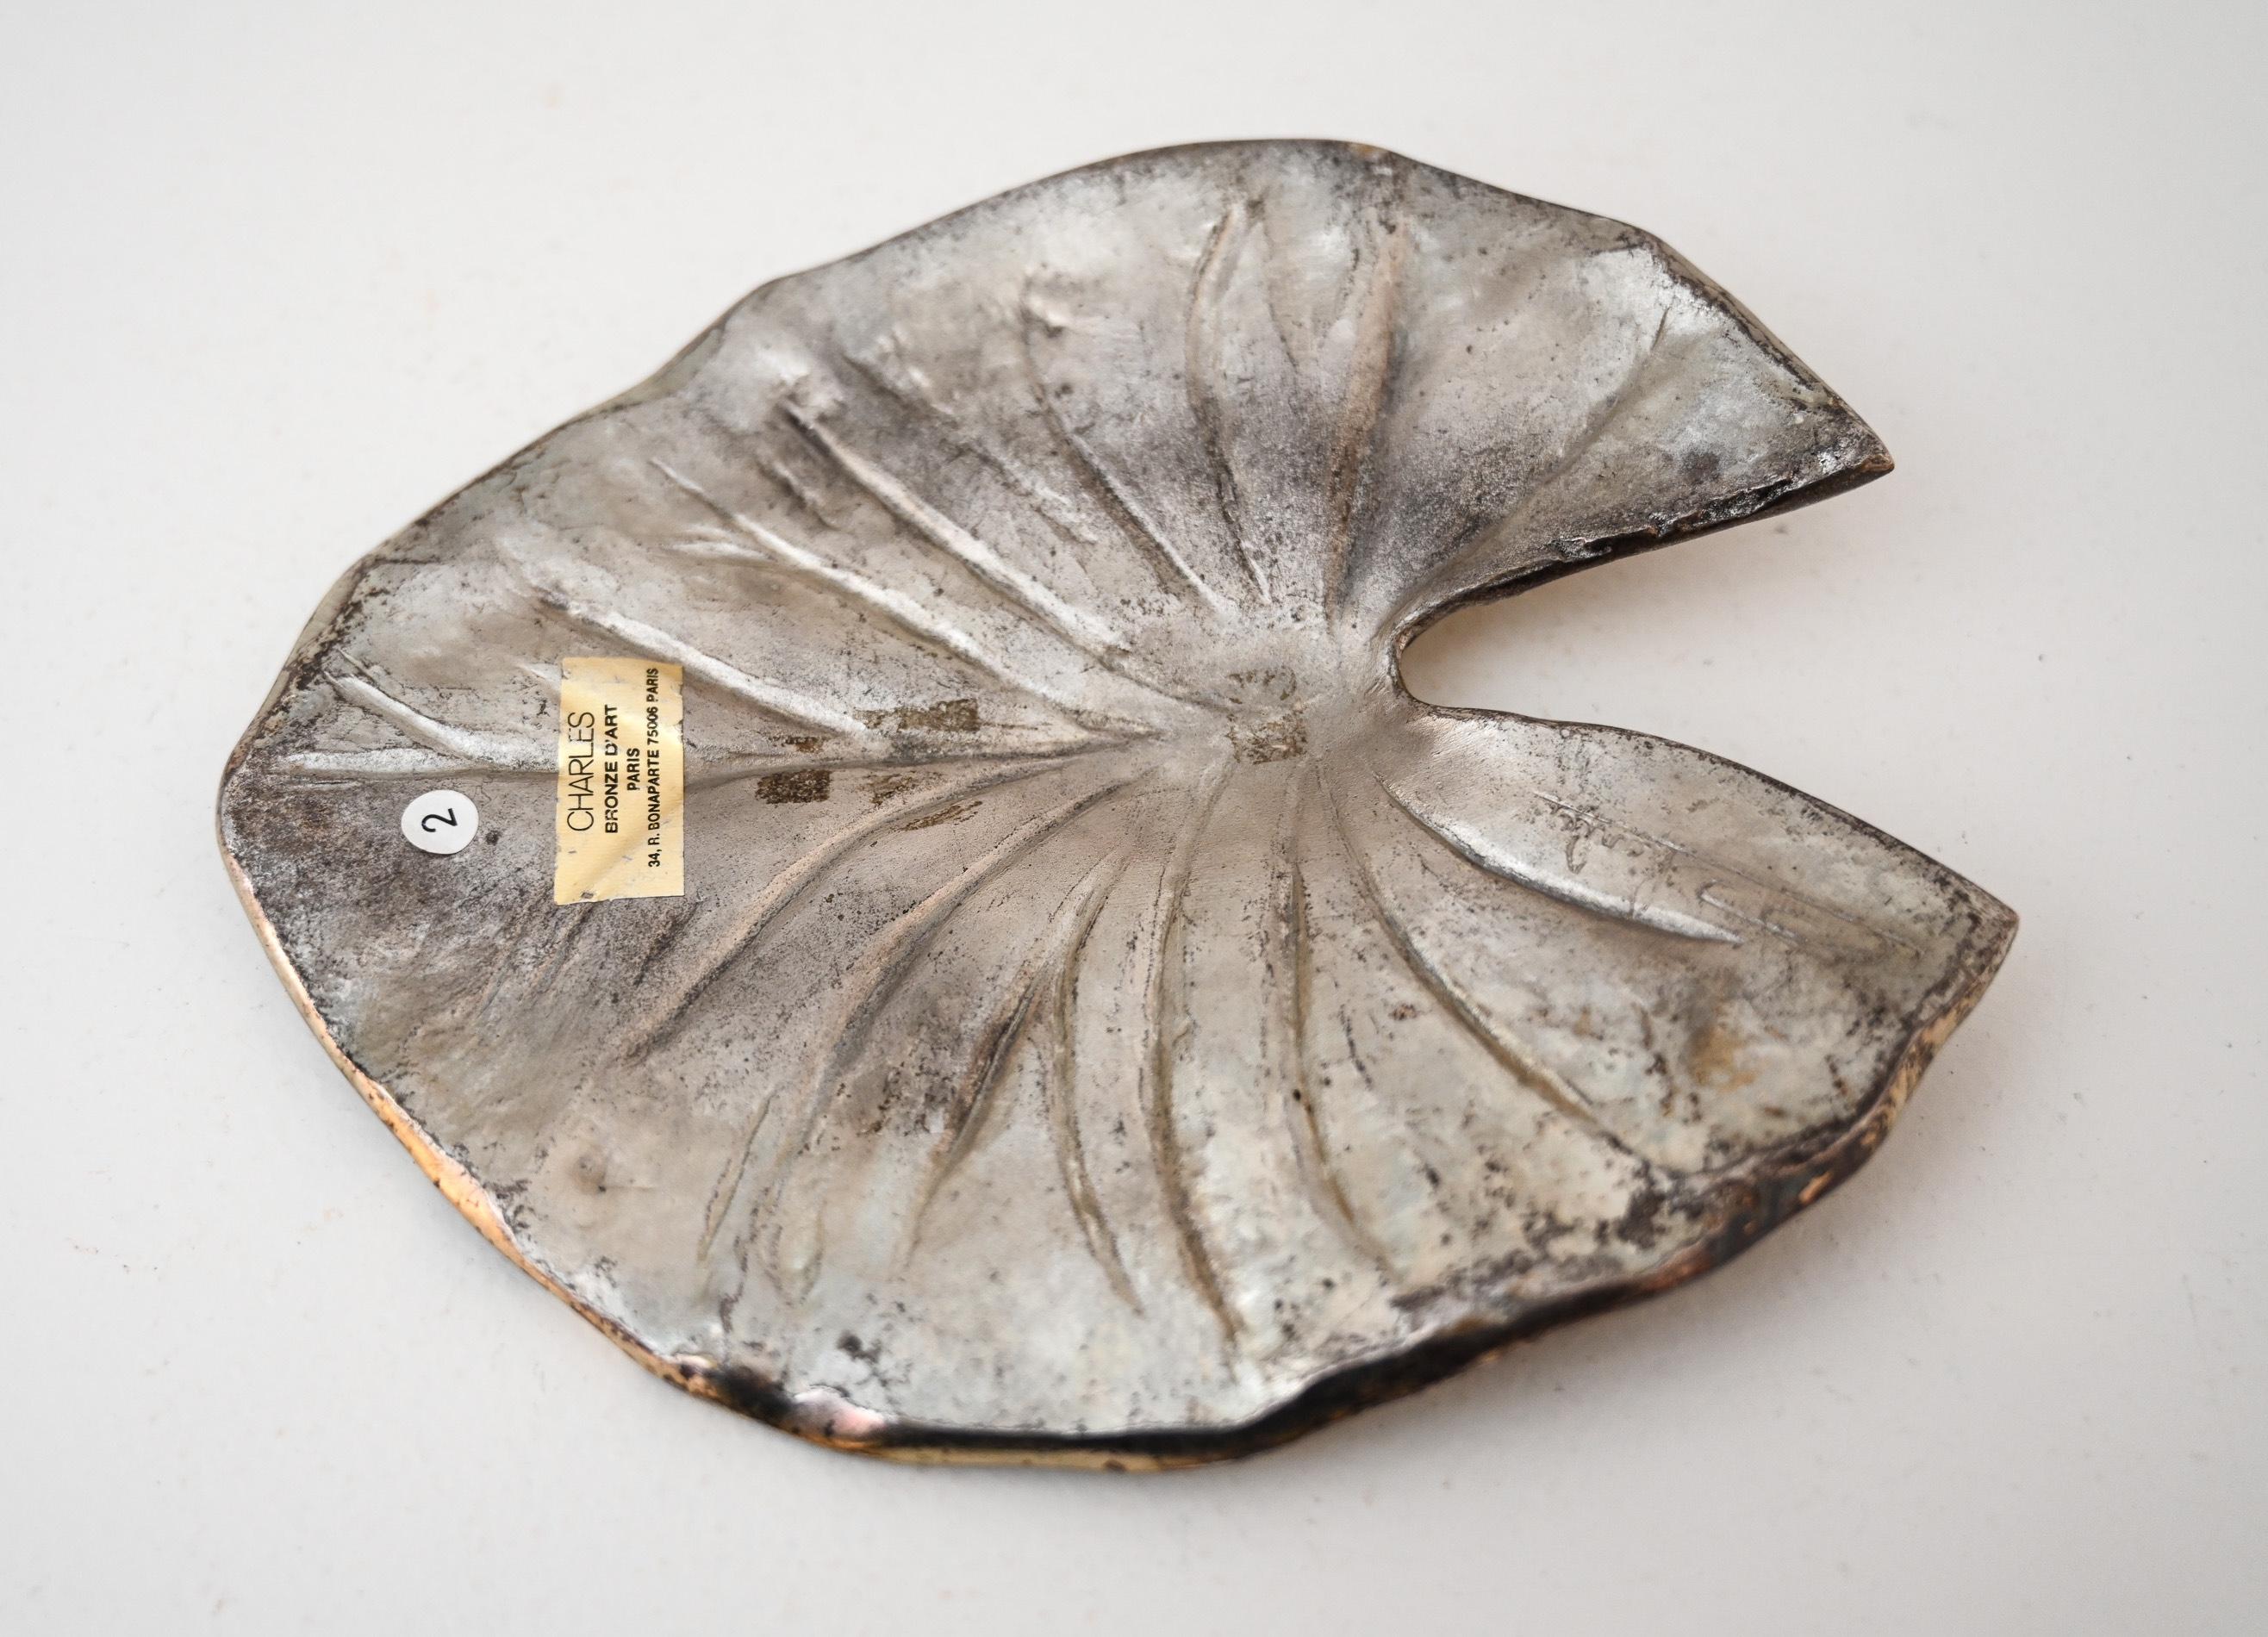 Silvered bronze Lily leaf by Chrystaine Charles signed, paper Charles Bronze D’Art label.

By Maison Charles, Paris circa 1970.

Provenance Galerie Chrystaine Charles, Rue Bonaparte Paris.